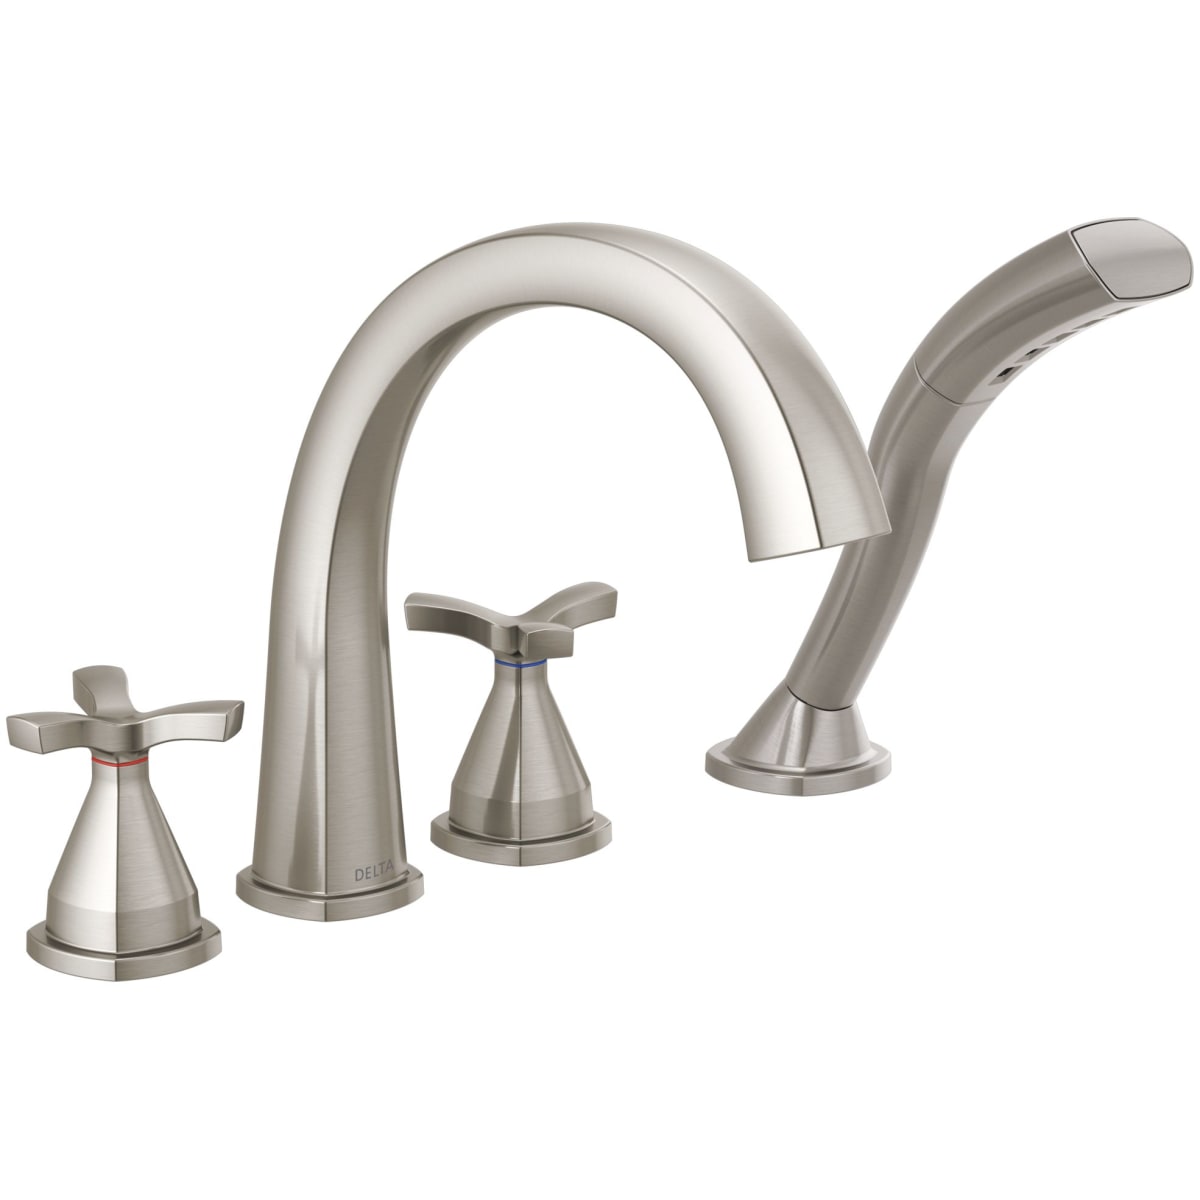 Delta T47776-SS Stryke Deck Mounted Roman Tub Filler with